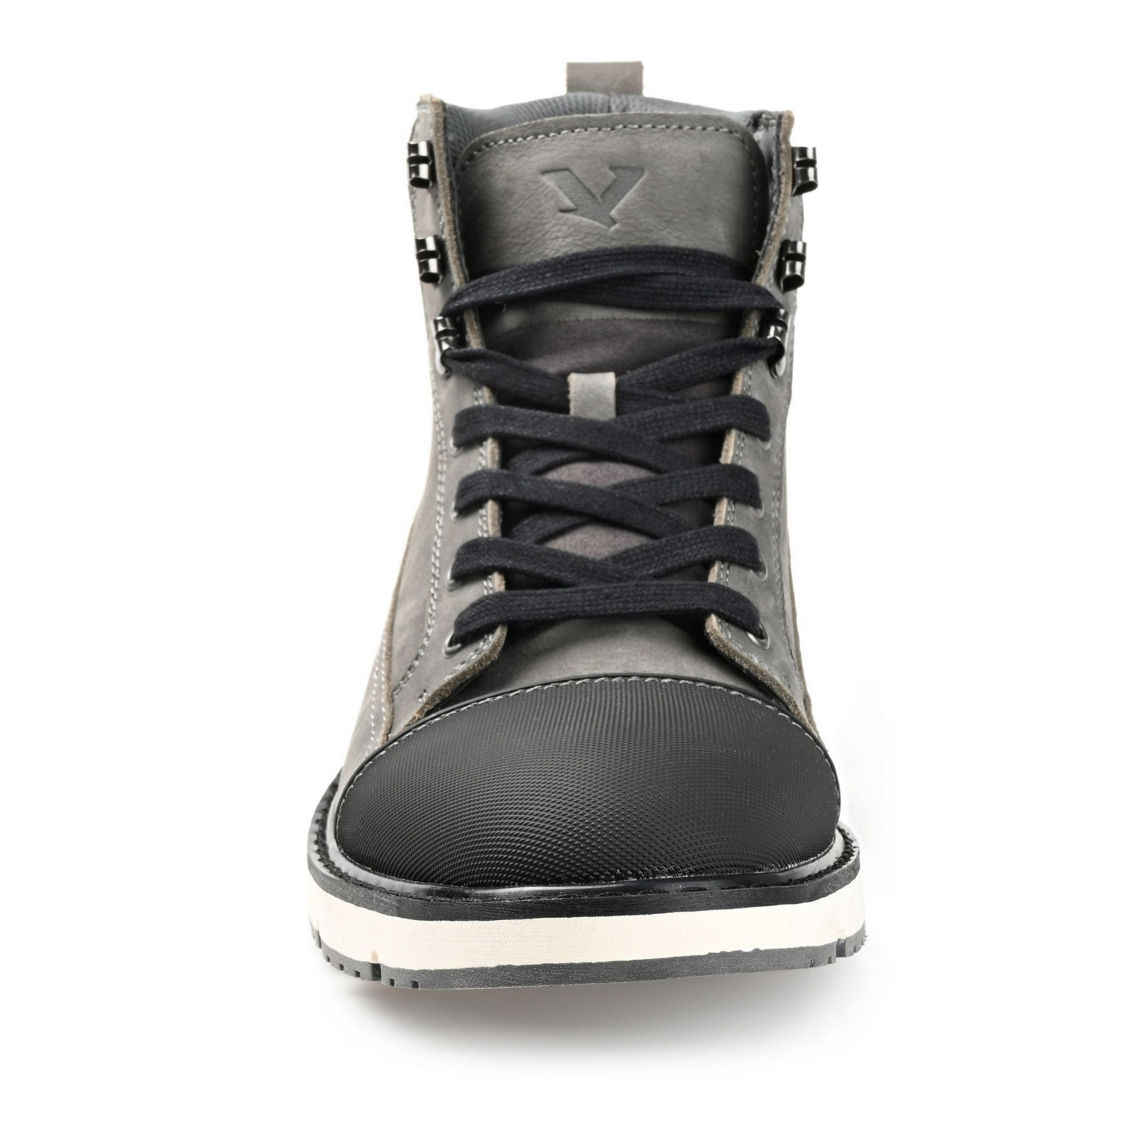 Territory Titan 2.0 Cap Toe Regular and Wide Width Ankle Boot - Image 2 of 2